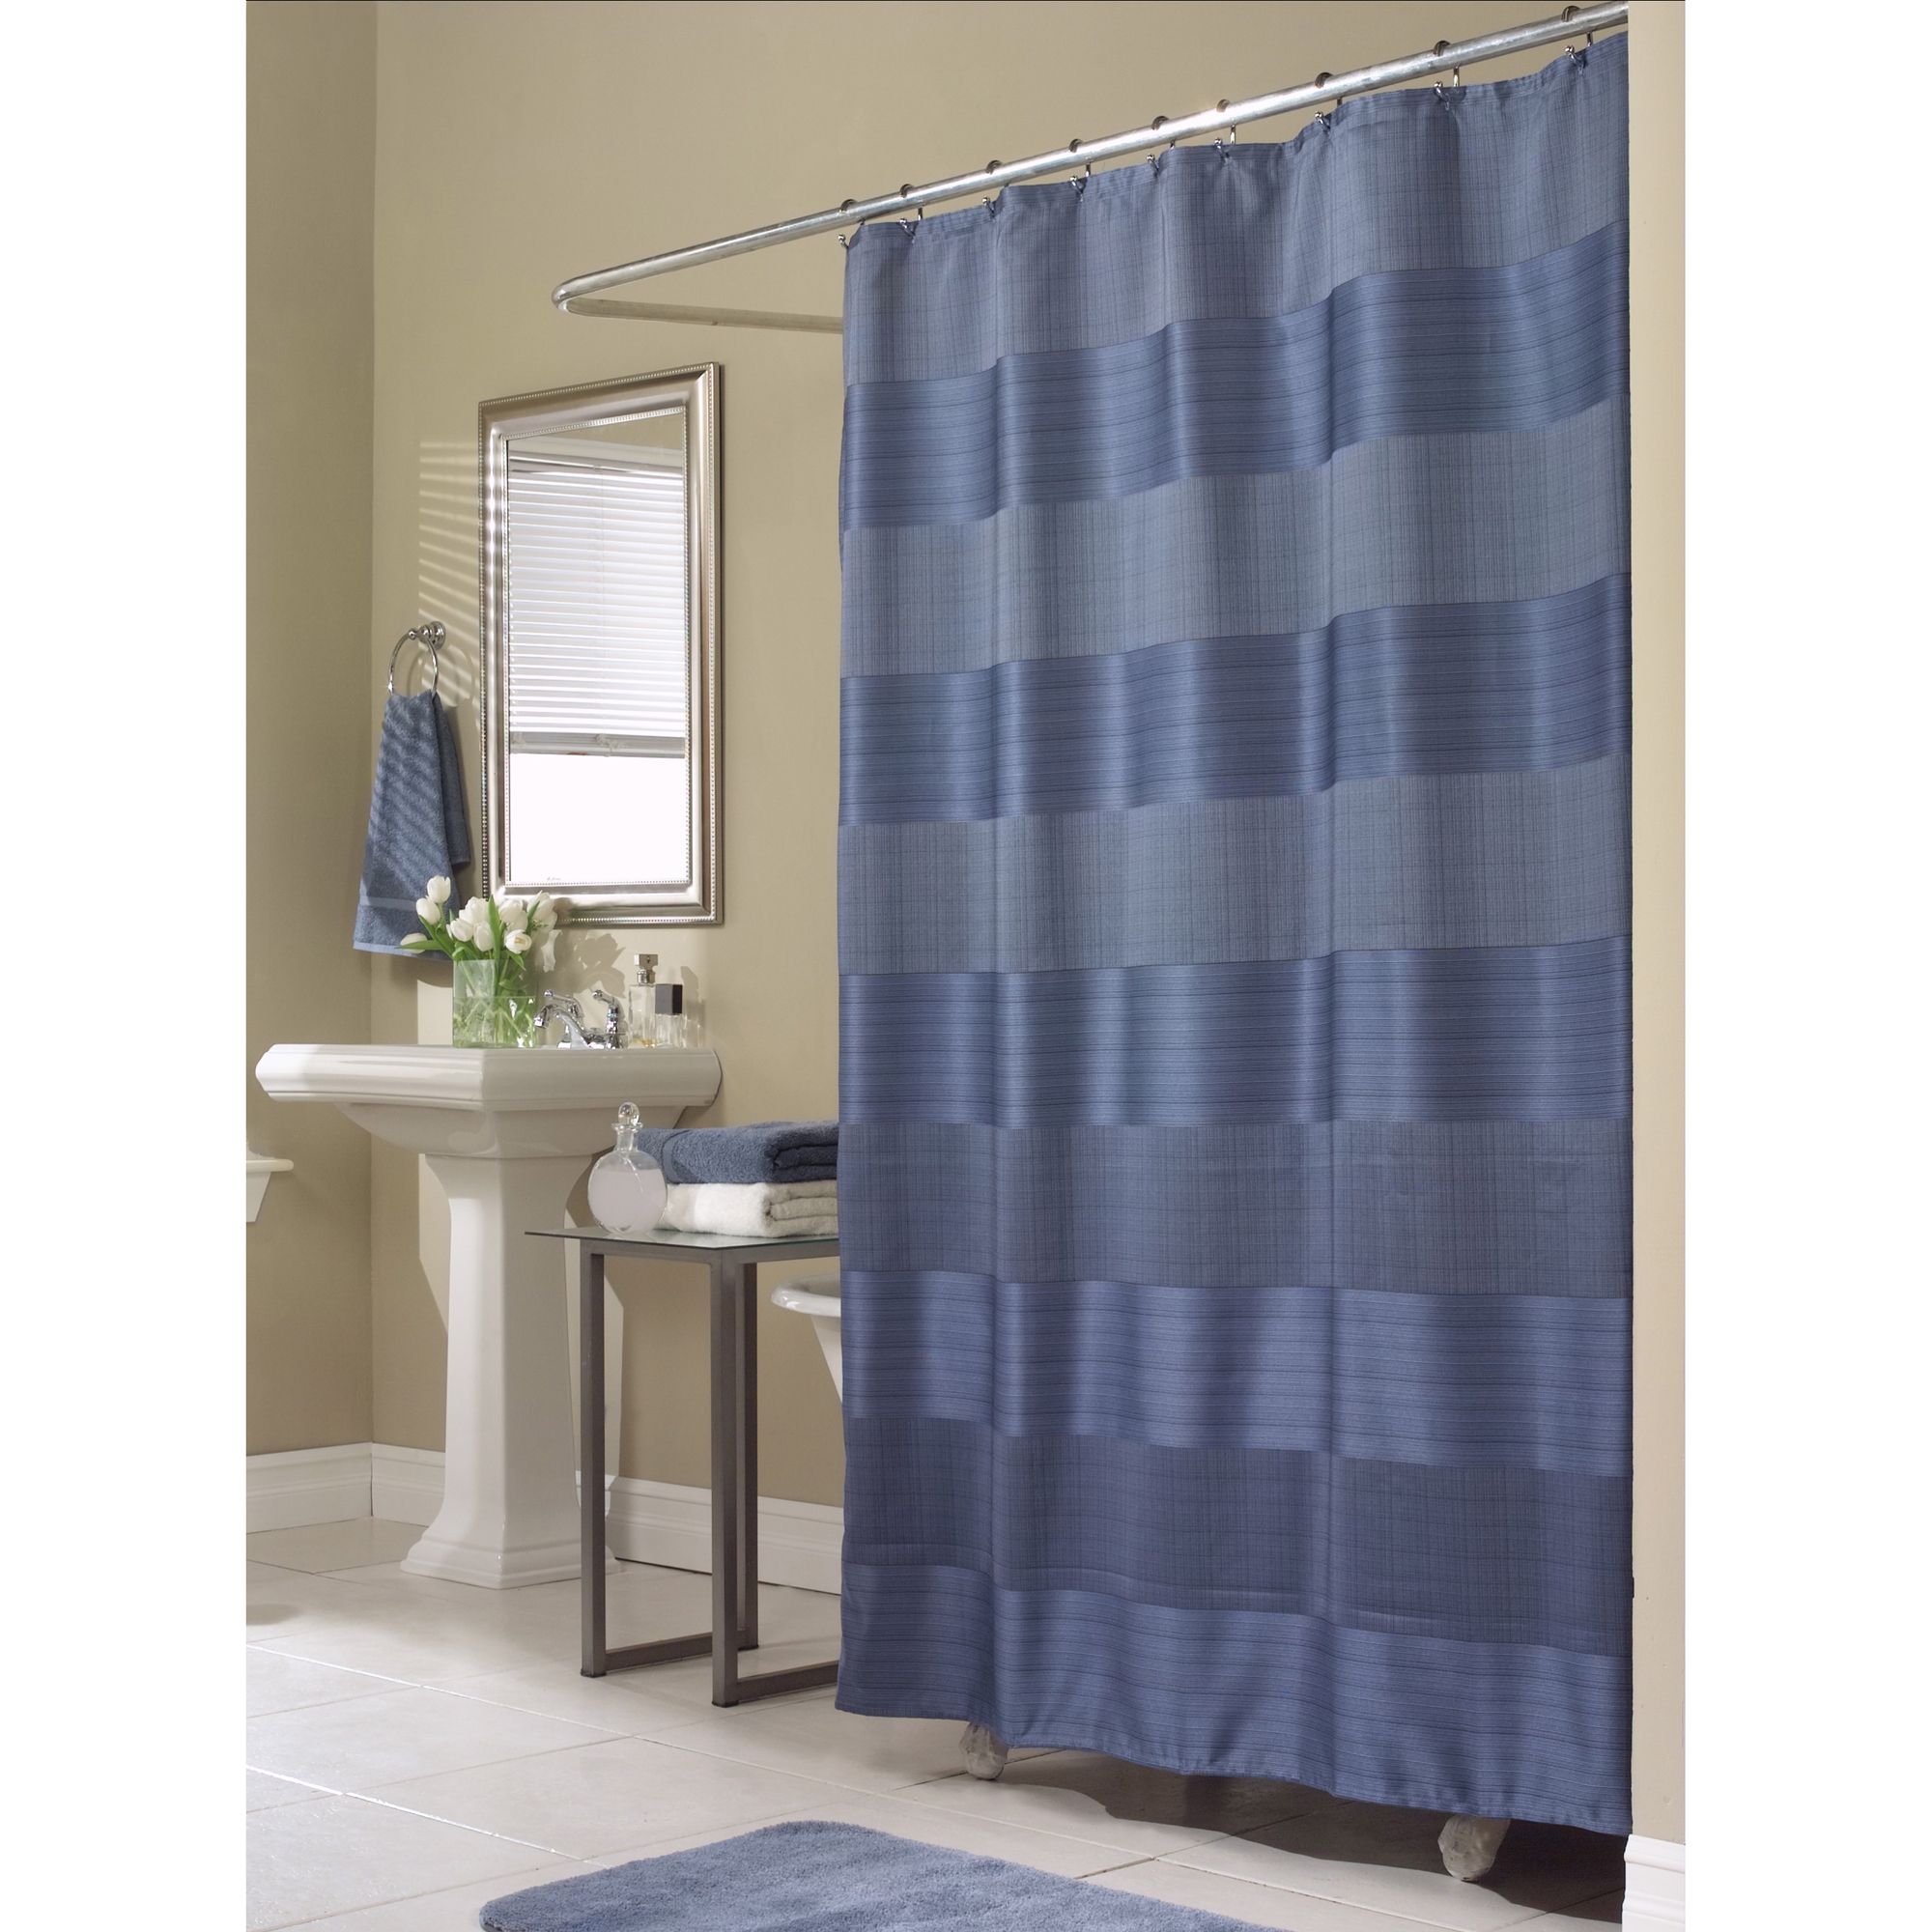 Cannon Shower Curtain Bryant Park Fabric